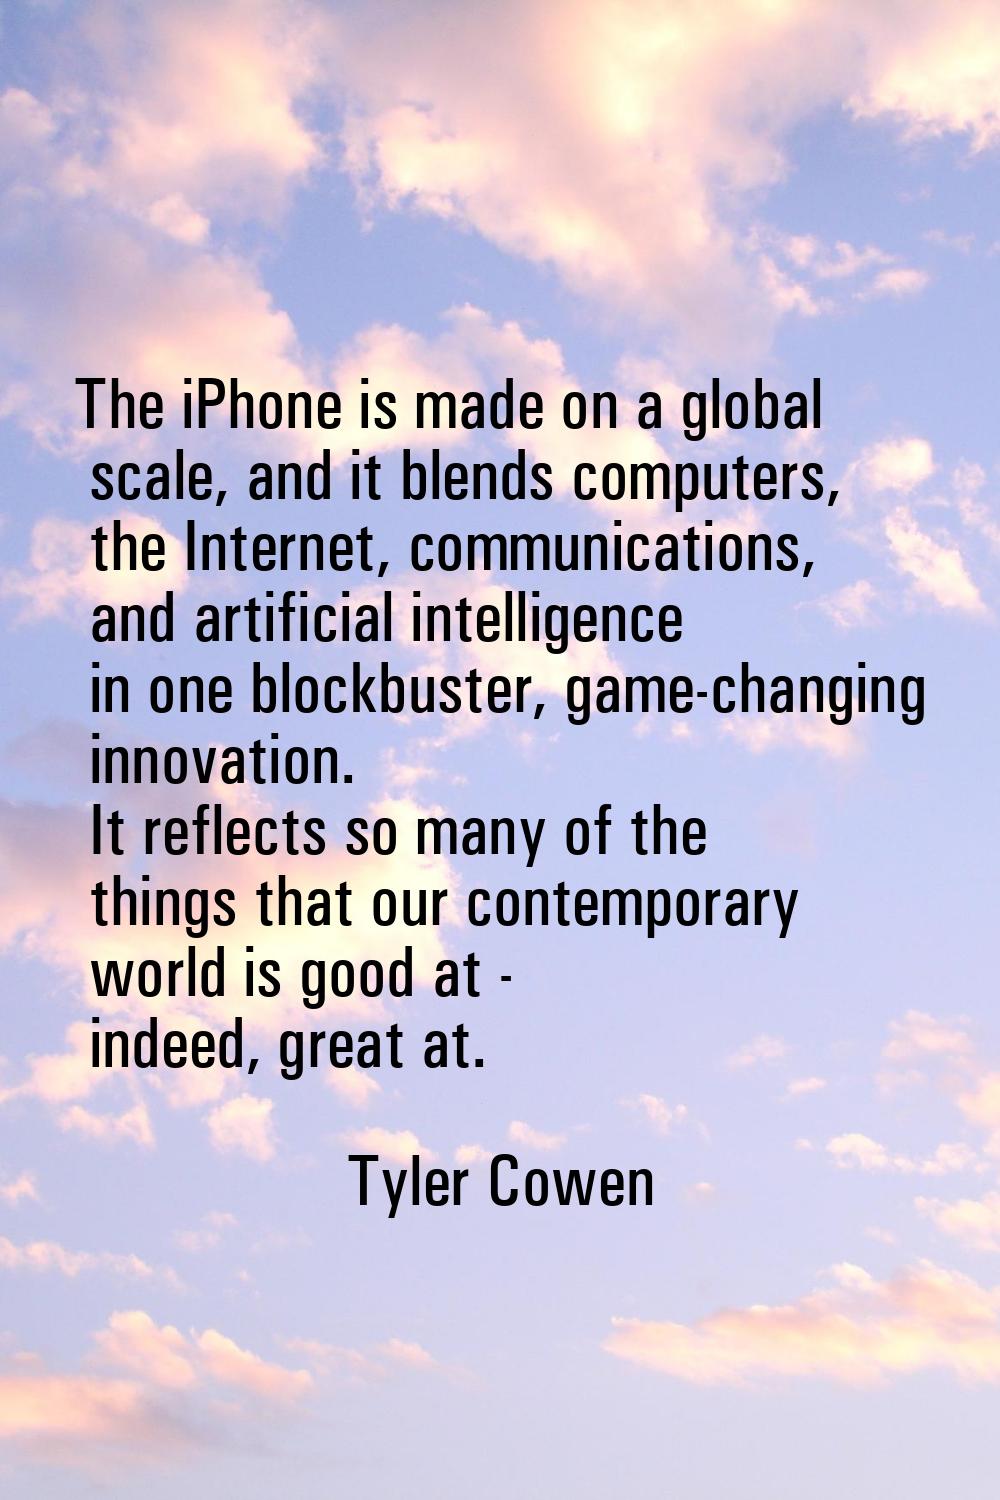 The iPhone is made on a global scale, and it blends computers, the Internet, communications, and ar